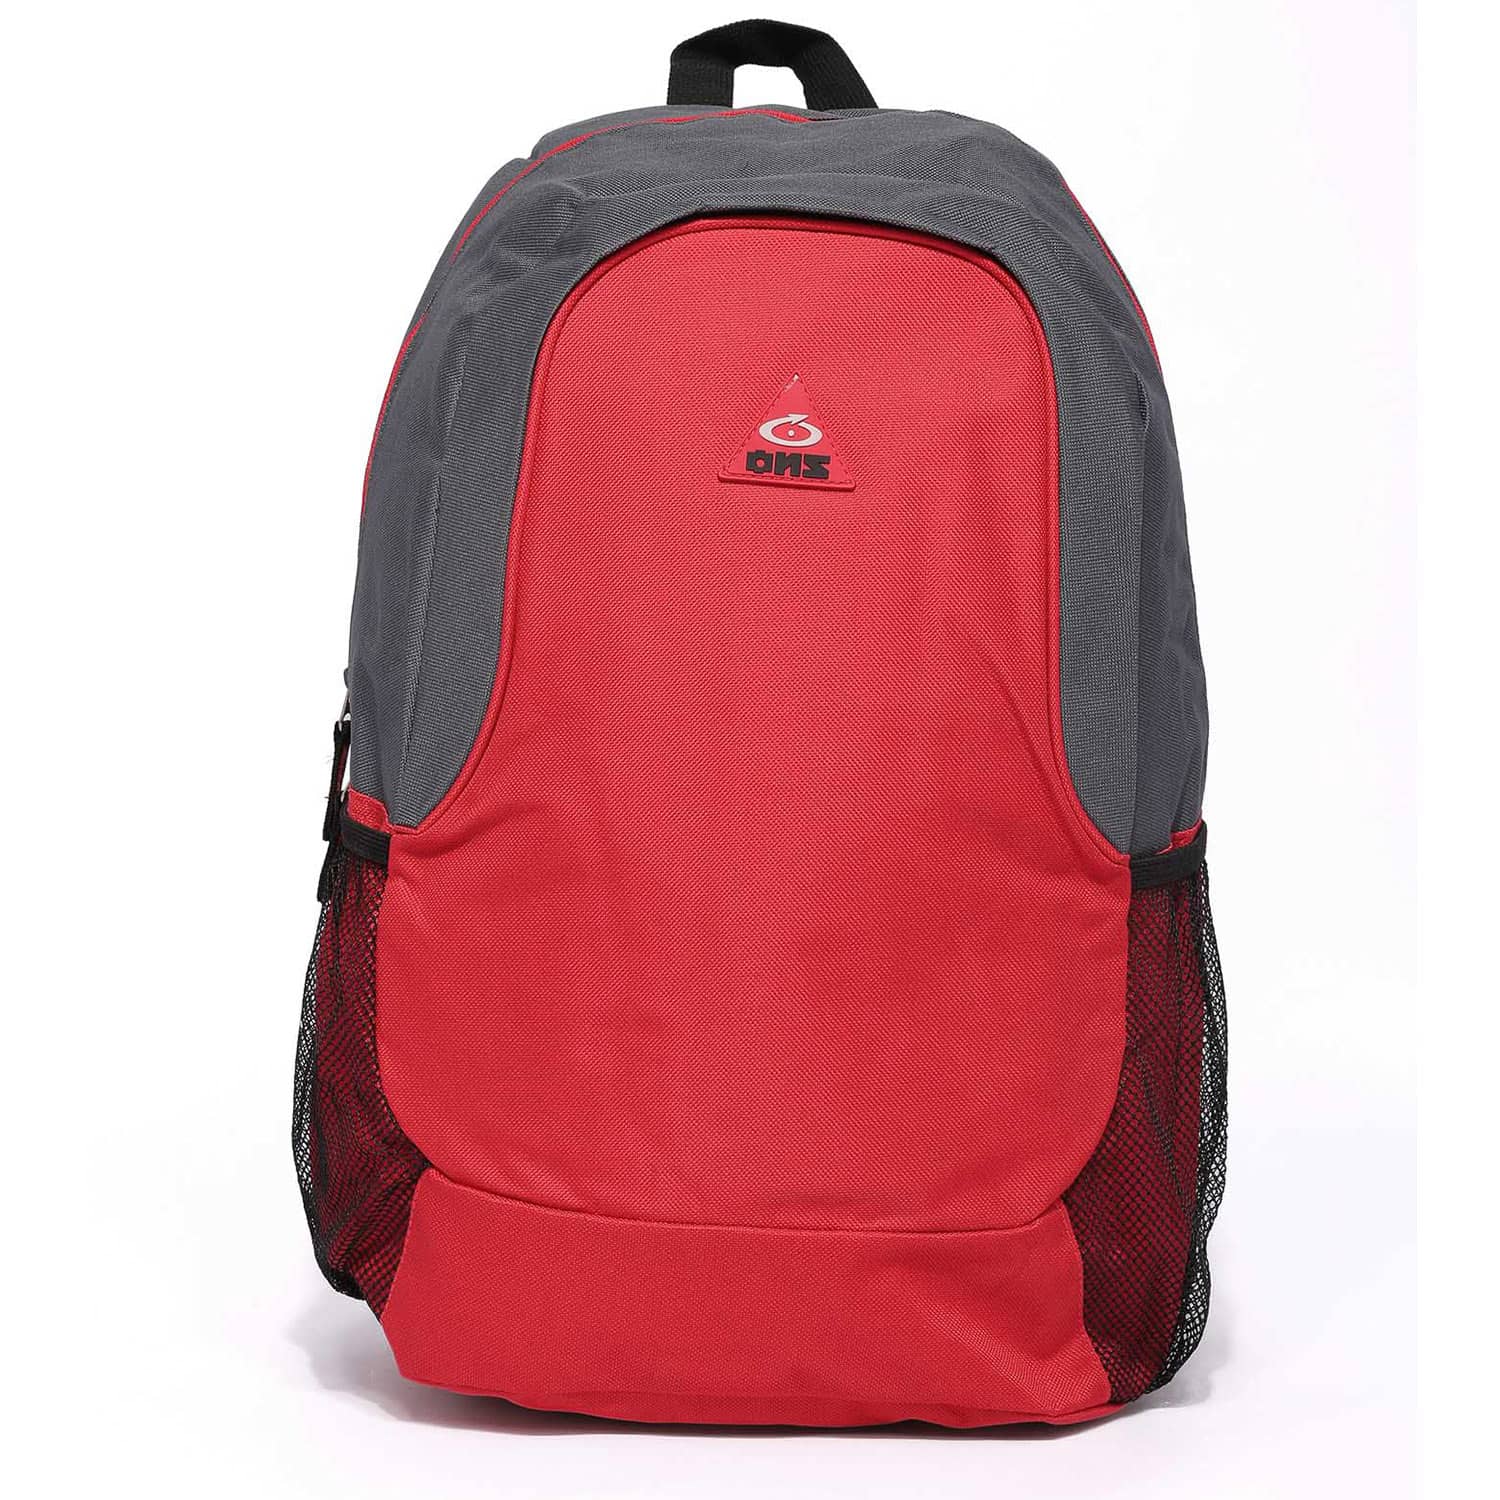 ONS Ranger Bag Red-Grey Price in Doha Qatar - Leading sports Equipment ...